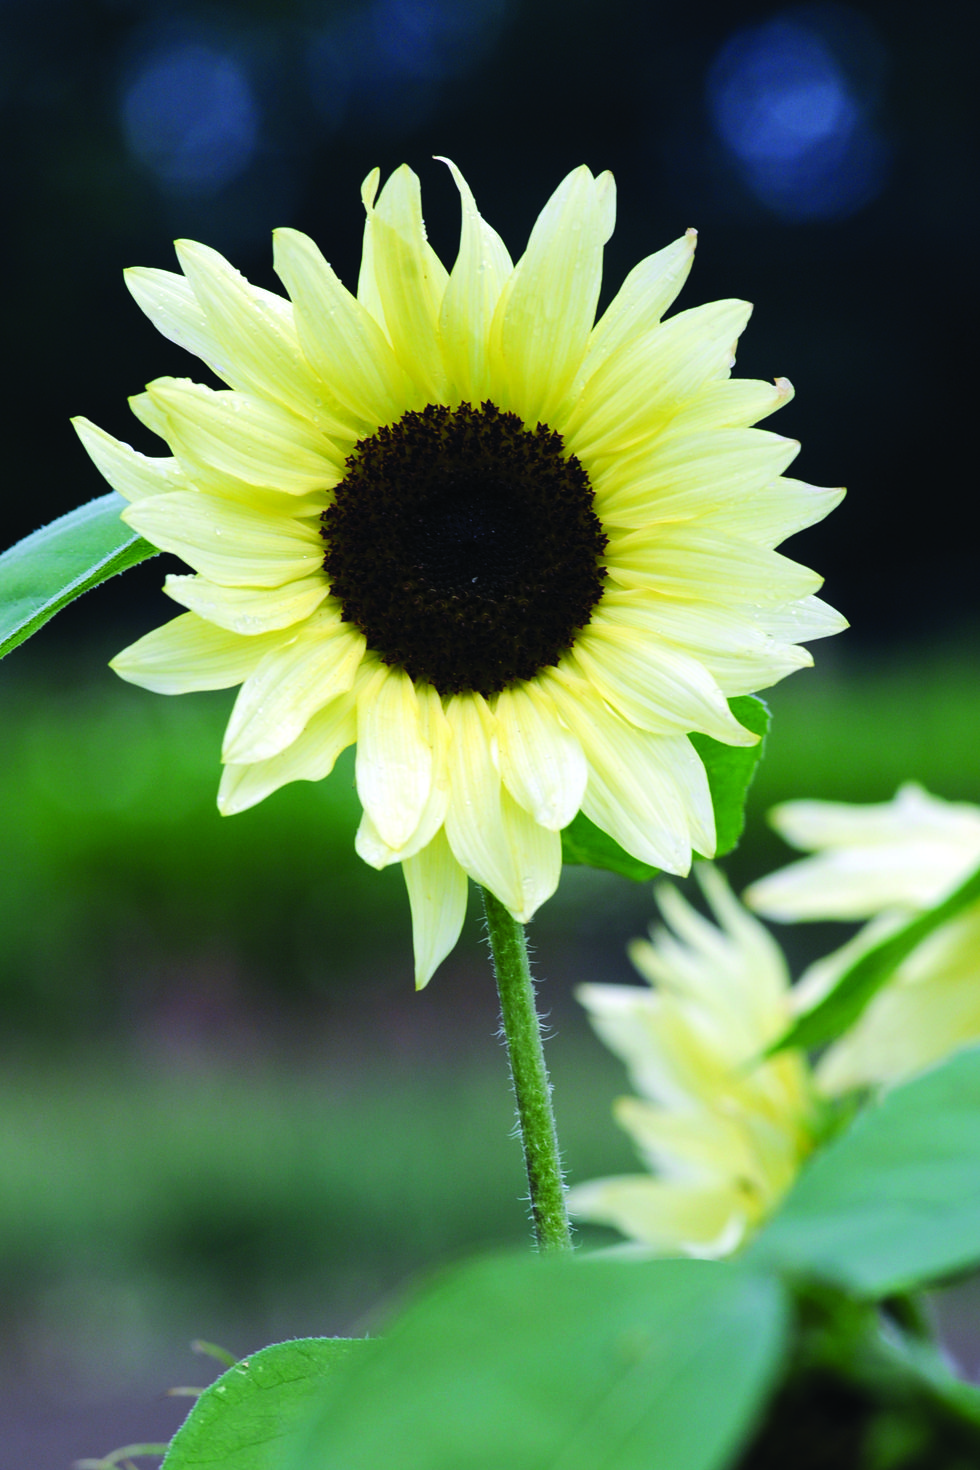 25 Best Types of Sunflowers - Varieties of Sunflowers to Plant